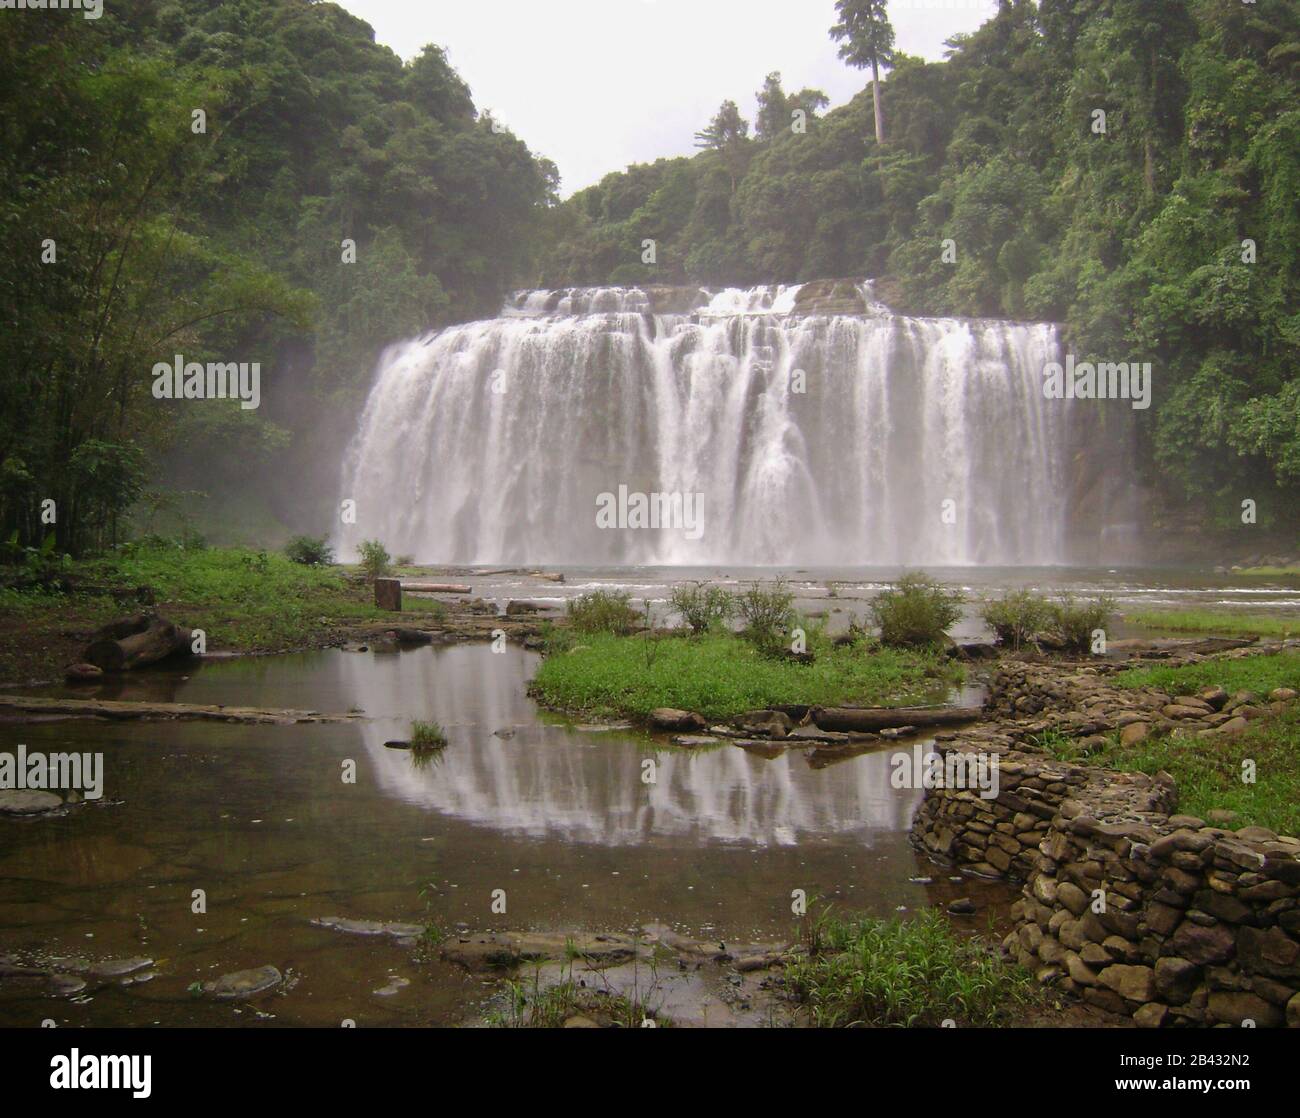 Tinuy-an Falls reflected in a pool  of water. Tinuy-an Falls is in Surigao del Sur, Philippines. Stock Photo